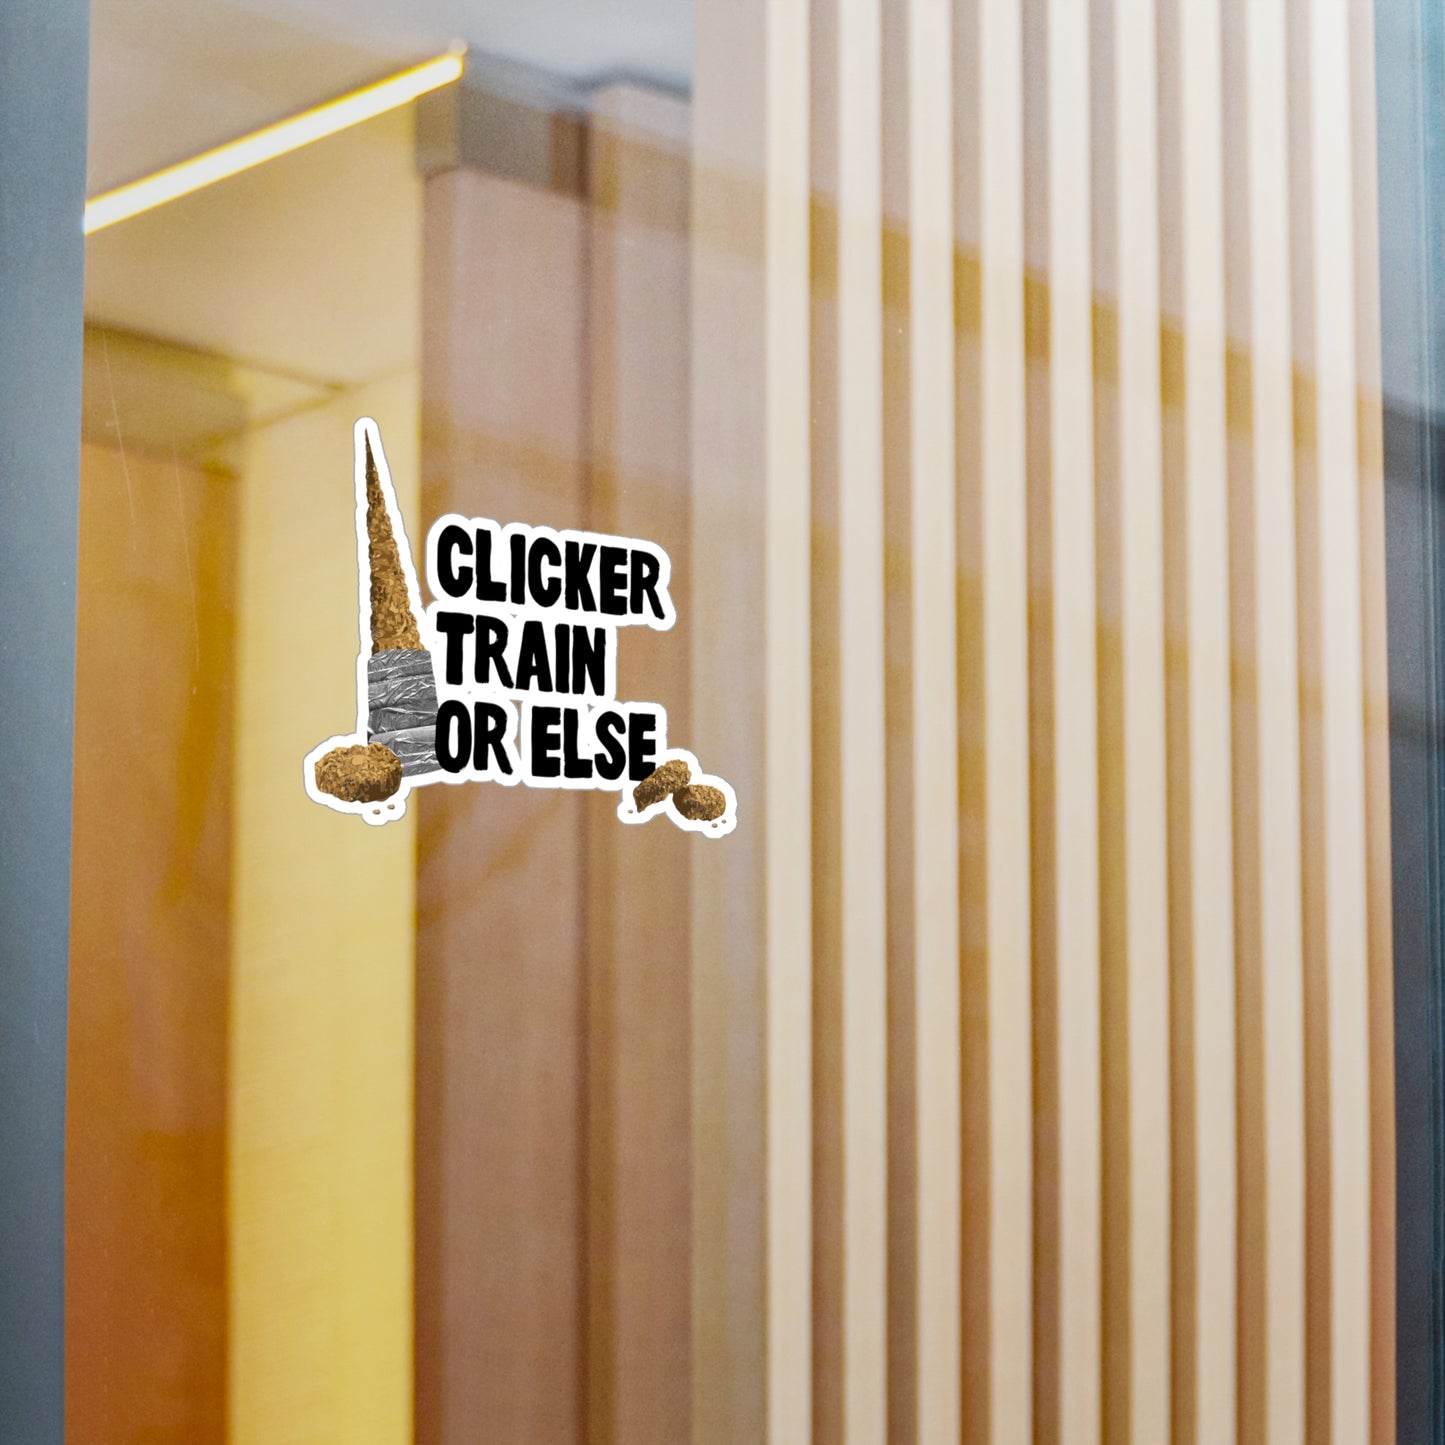 Clicker Train or Else Decal